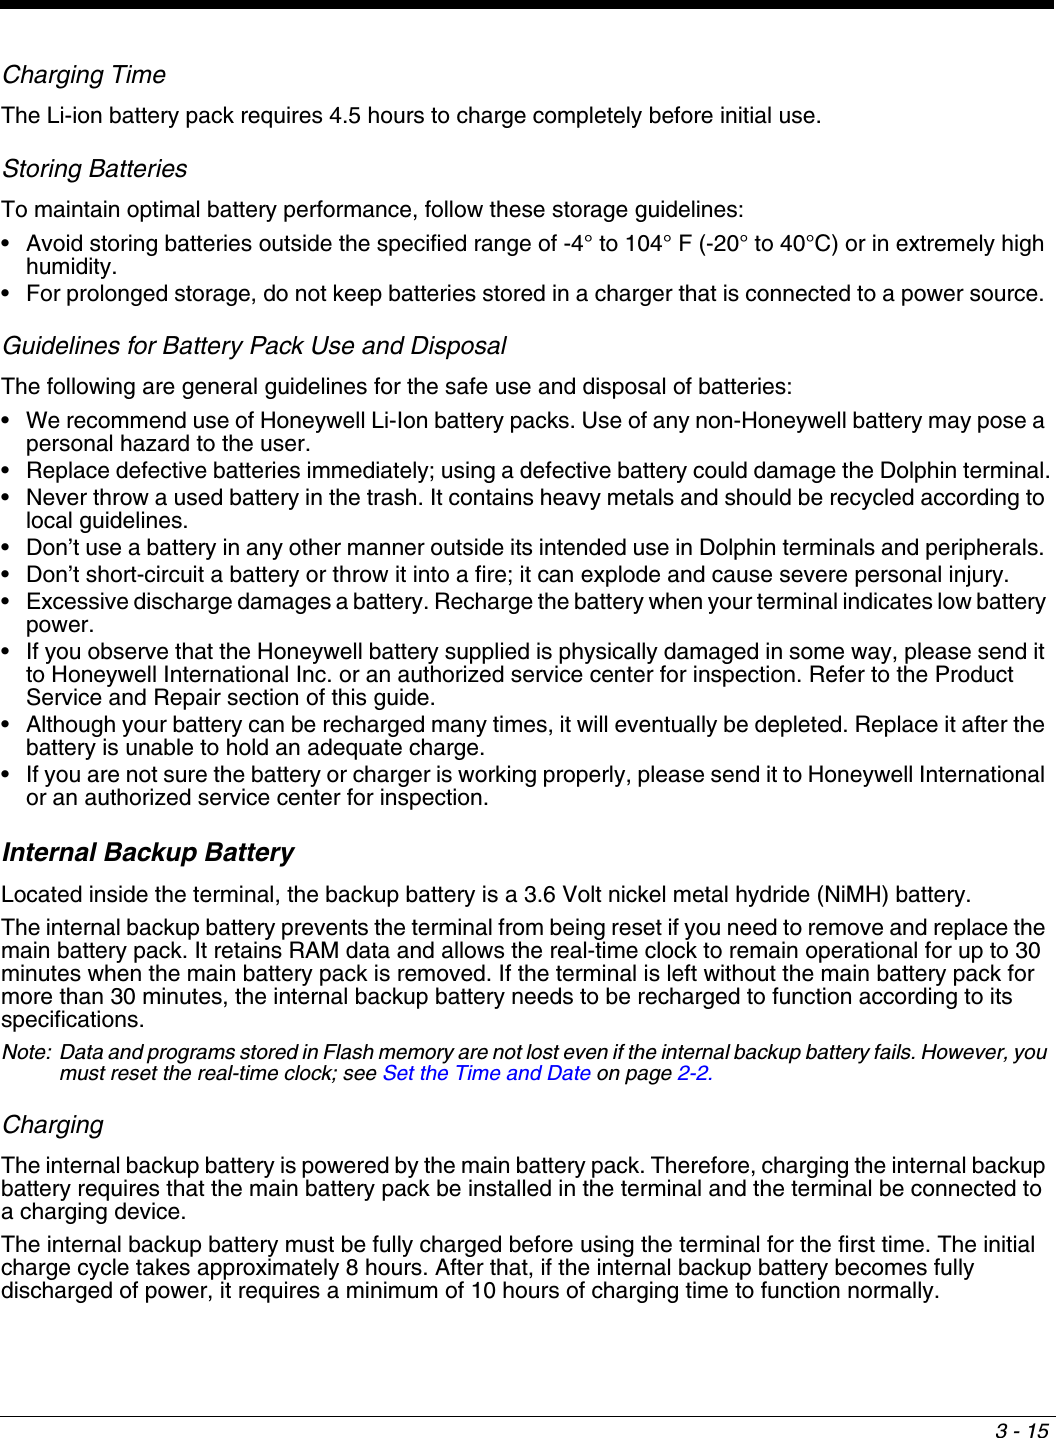 3 - 15Charging TimeThe Li-ion battery pack requires 4.5 hours to charge completely before initial use.Storing BatteriesTo maintain optimal battery performance, follow these storage guidelines:•         Avoid  storing  batteries  outside  the  specified  range of -4° to 104° F (-20° to 40°C) or in extremely high humidity.•         For  prolonged  storage,  do  not  keep  batteries  stored in a charger that is connected to a power source. Guidelines for Battery Pack Use and DisposalThe following are general guidelines for the safe use and disposal of batteries:•         We  recommend  use  of  Honeywell  Li-Ion  battery packs. Use of any non-Honeywell battery may pose a personal hazard to the user.•         Replace  defective  batteries  immediately;  using a defective battery could damage the Dolphin terminal.•        Never throw a used battery in the trash. It contains heavy metals and should be recycled according to local guidelines. •         Don’t  use  a  battery  in  any  other  manner  outside its intended use in Dolphin terminals and peripherals. •         Don’t  short-circuit  a  battery  or  throw  it  into a fire; it can explode and cause severe personal injury.•        Excessive discharge damages a battery. Recharge the battery when your terminal indicates low battery power.•         If  you  observe  that  the  Honeywell  battery  supplied is physically damaged in some way, please send it to Honeywell International Inc. or an authorized service center for inspection. Refer to the Product Service and Repair section of this guide.•         Although  your  battery  can  be  recharged  many  times, it will eventually be depleted. Replace it after the battery is unable to hold an adequate charge.•        If you are not sure the battery or charger is working properly, please send it to Honeywell International or an authorized service center for inspection.Internal Backup BatteryLocated inside the terminal, the backup battery is a 3.6 Volt nickel metal hydride (NiMH) battery. The internal backup battery prevents the terminal from being reset if you need to remove and replace the main battery pack. It retains RAM data and allows the real-time clock to remain operational for up to 30 minutes when the main battery pack is removed. If the terminal is left without the main battery pack for more than 30 minutes, the internal backup battery needs to be recharged to function according to its specifications. Note: Data and programs stored in Flash memory are not lost even if the internal backup battery fails. However, you must reset the real-time clock; see Set the Time and Date on page 2-2.ChargingThe internal backup battery is powered by the main battery pack. Therefore, charging the internal backup battery requires that the main battery pack be installed in the terminal and the terminal be connected to a charging device.The internal backup battery must be fully charged before using the terminal for the first time. The initial charge cycle takes approximately 8 hours. After that, if the internal backup battery becomes fully discharged of power, it requires a minimum of 10 hours of charging time to function normally.